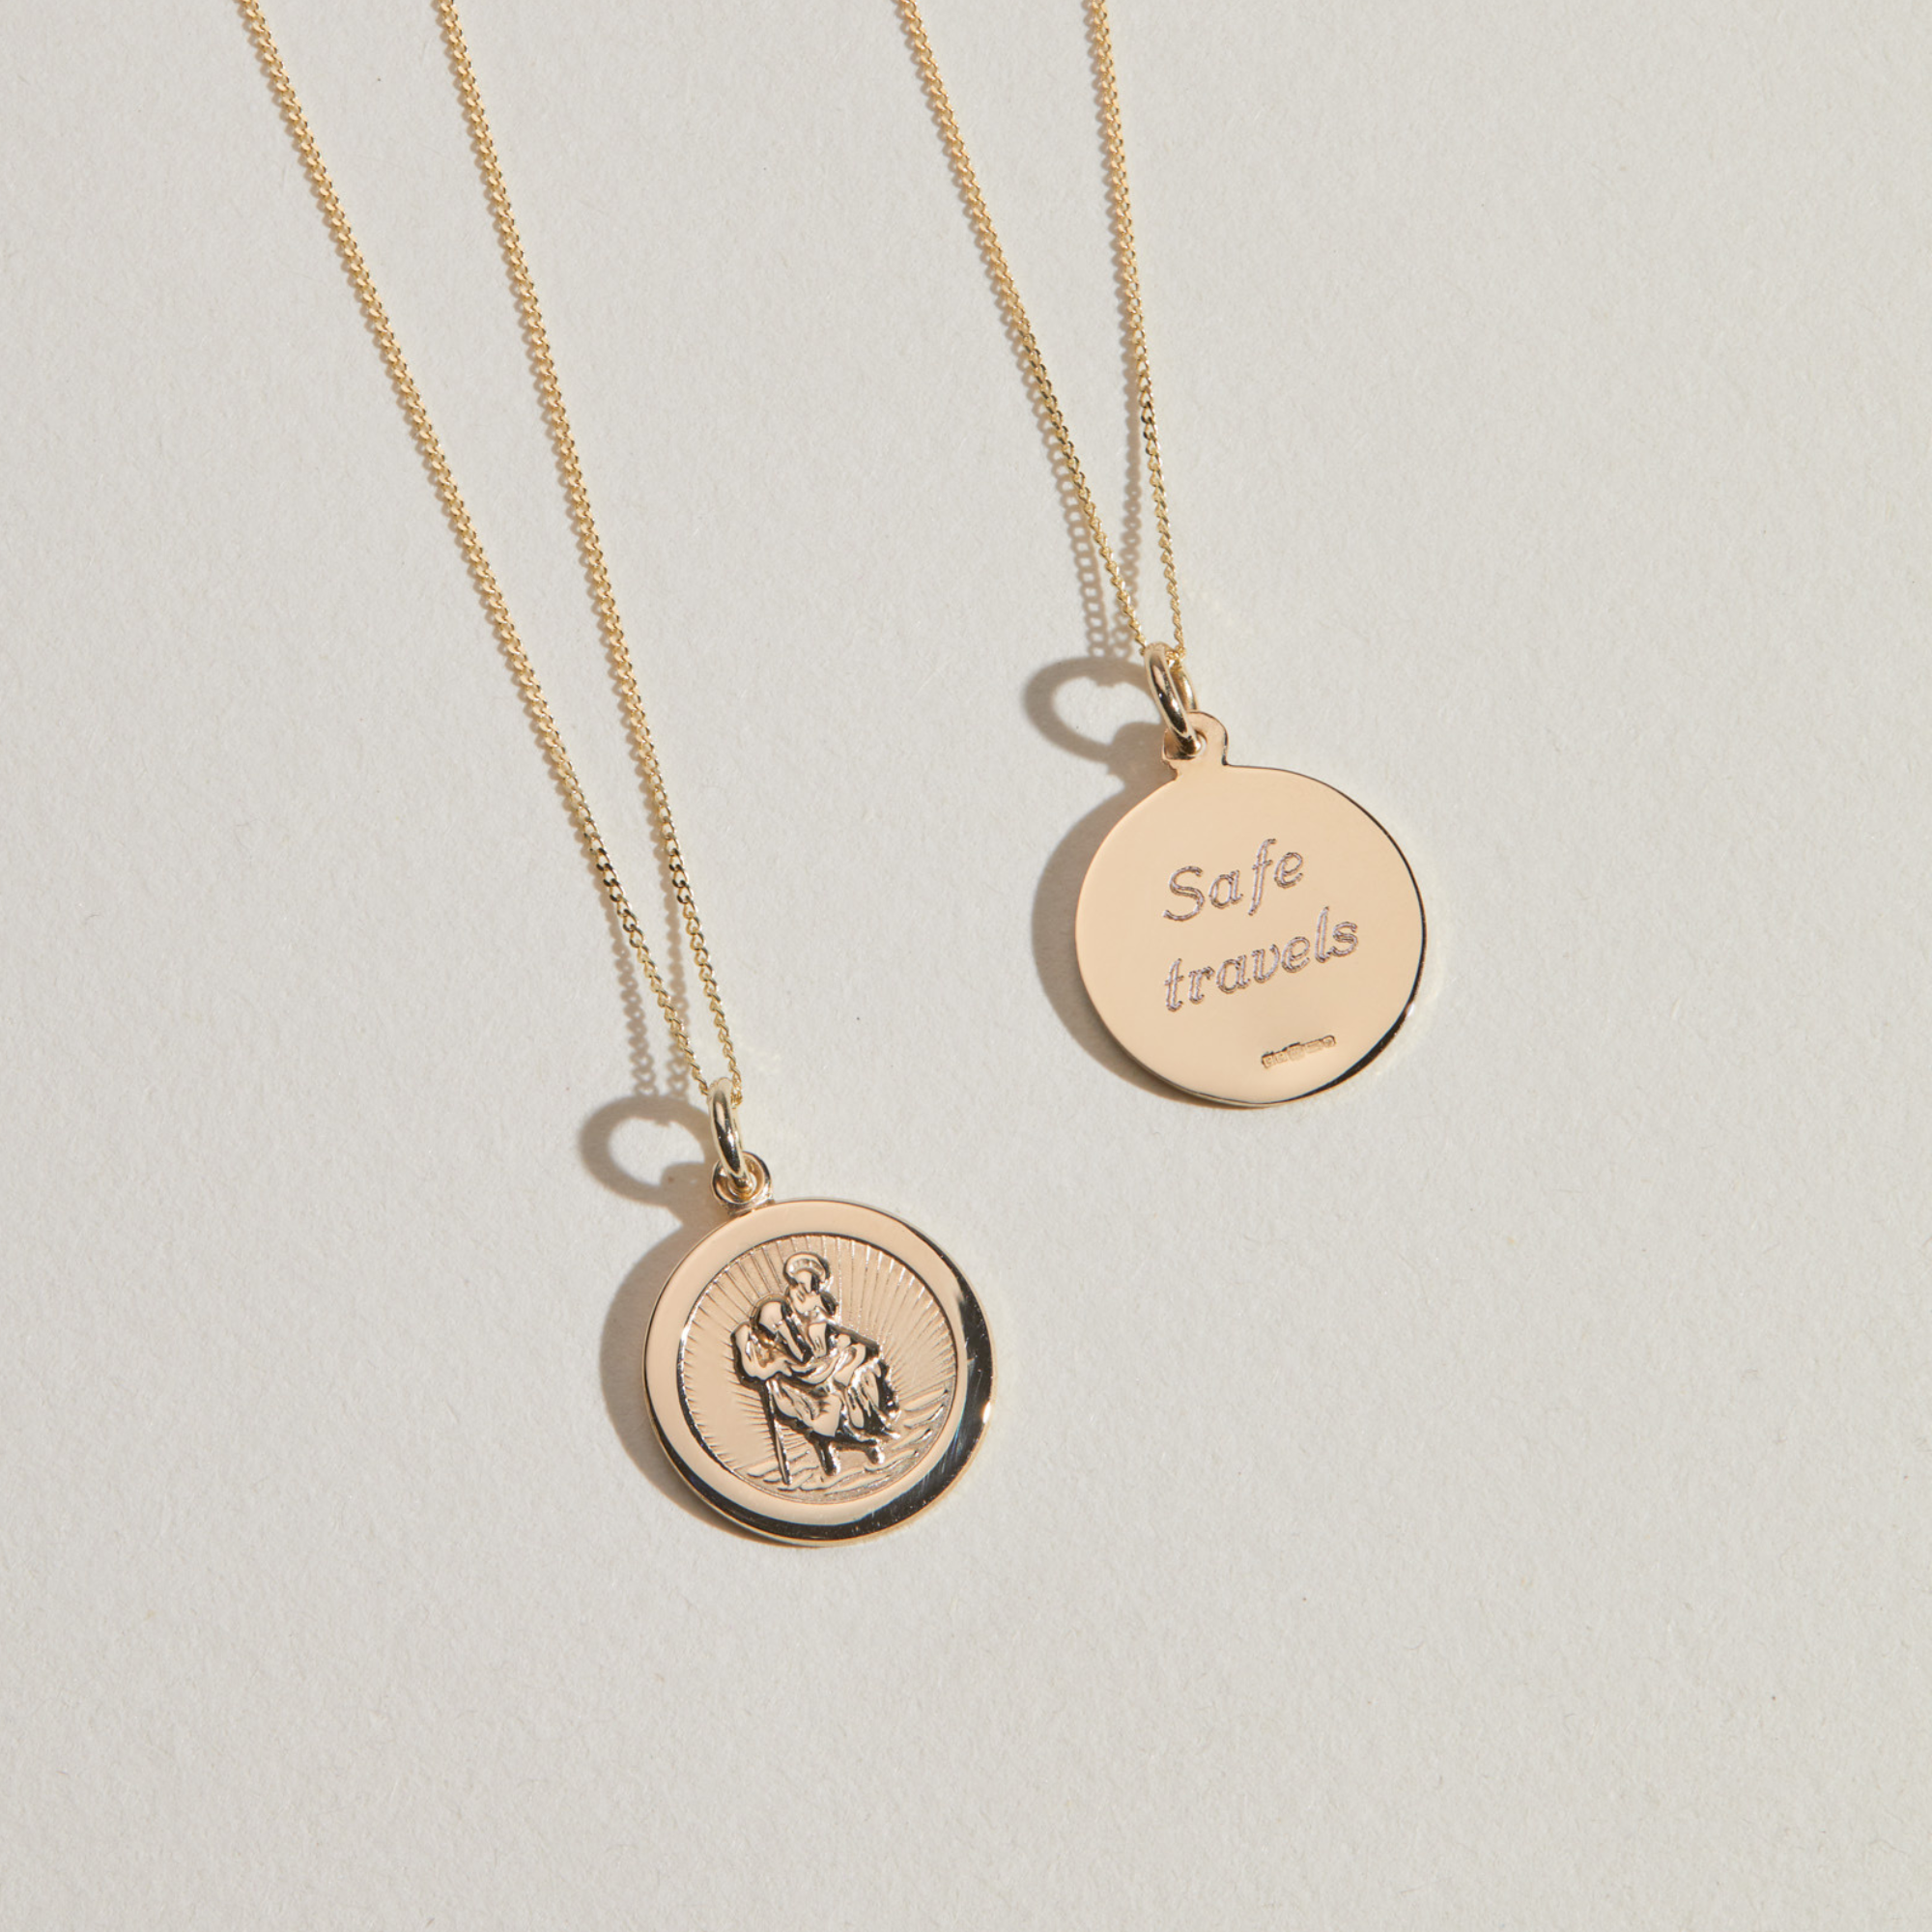 Gold small round St Christopher medallion necklace next to the back of a gold round medallion necklace with the words 'Safe travels' engraved